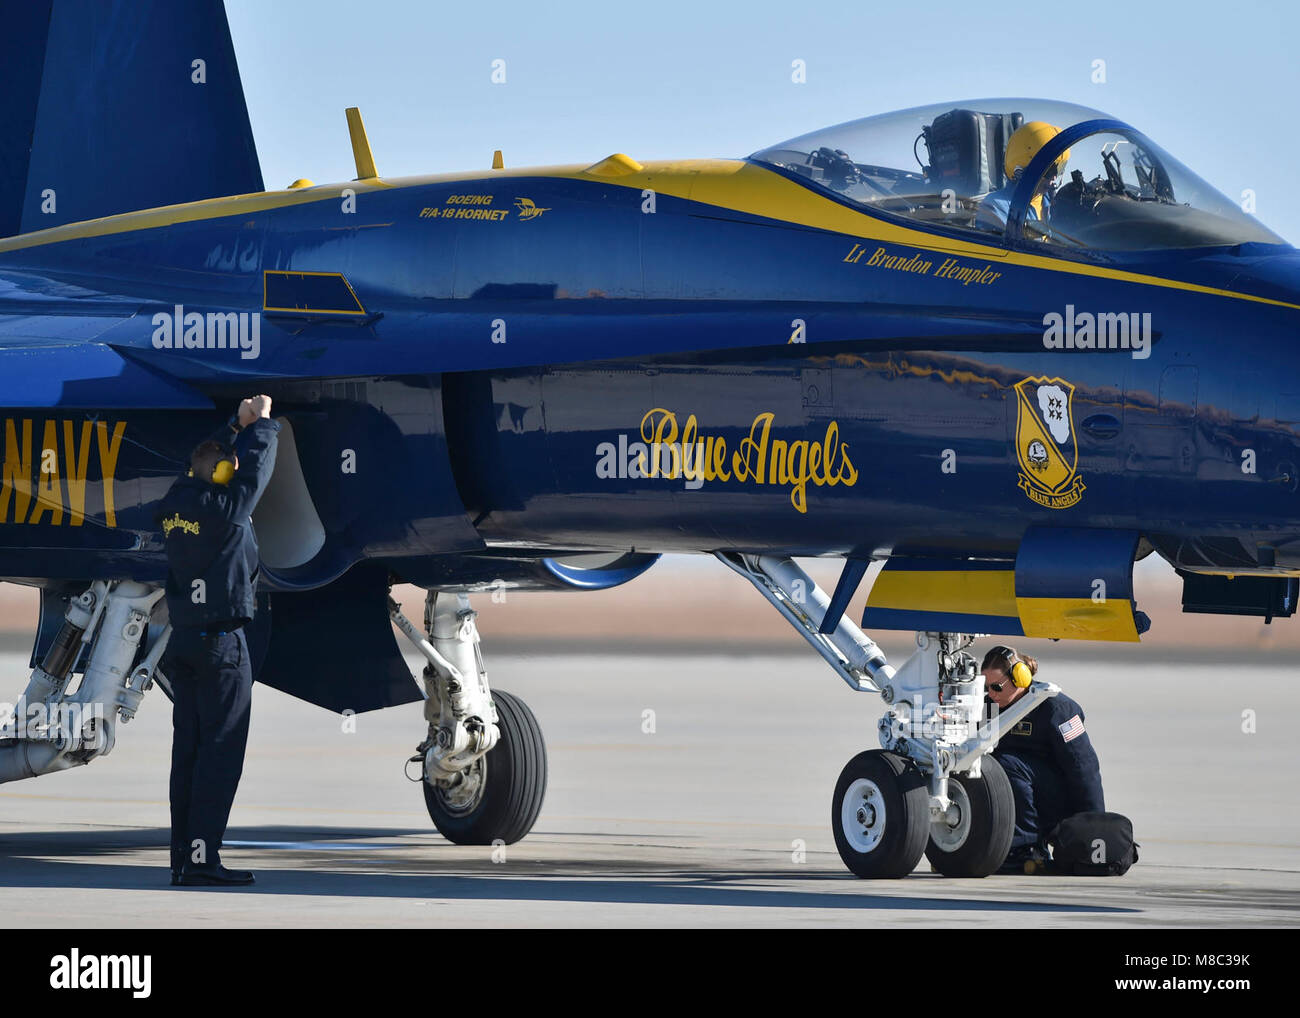 EL CENTRO, Calif. (Feb. 24, 2018) Blue Angels Crew Chief, Yeoman 2nd Class, Kyle Wood, and Aviation Machinist Mate 1st Class, Ali Erickson, recover a jet after a pratice demonstration. The Blue Angels are scheduled to perform more than 60 demonstrations at more than 30 locations across the U.S. in 2018. (U.S. Navy Stock Photo